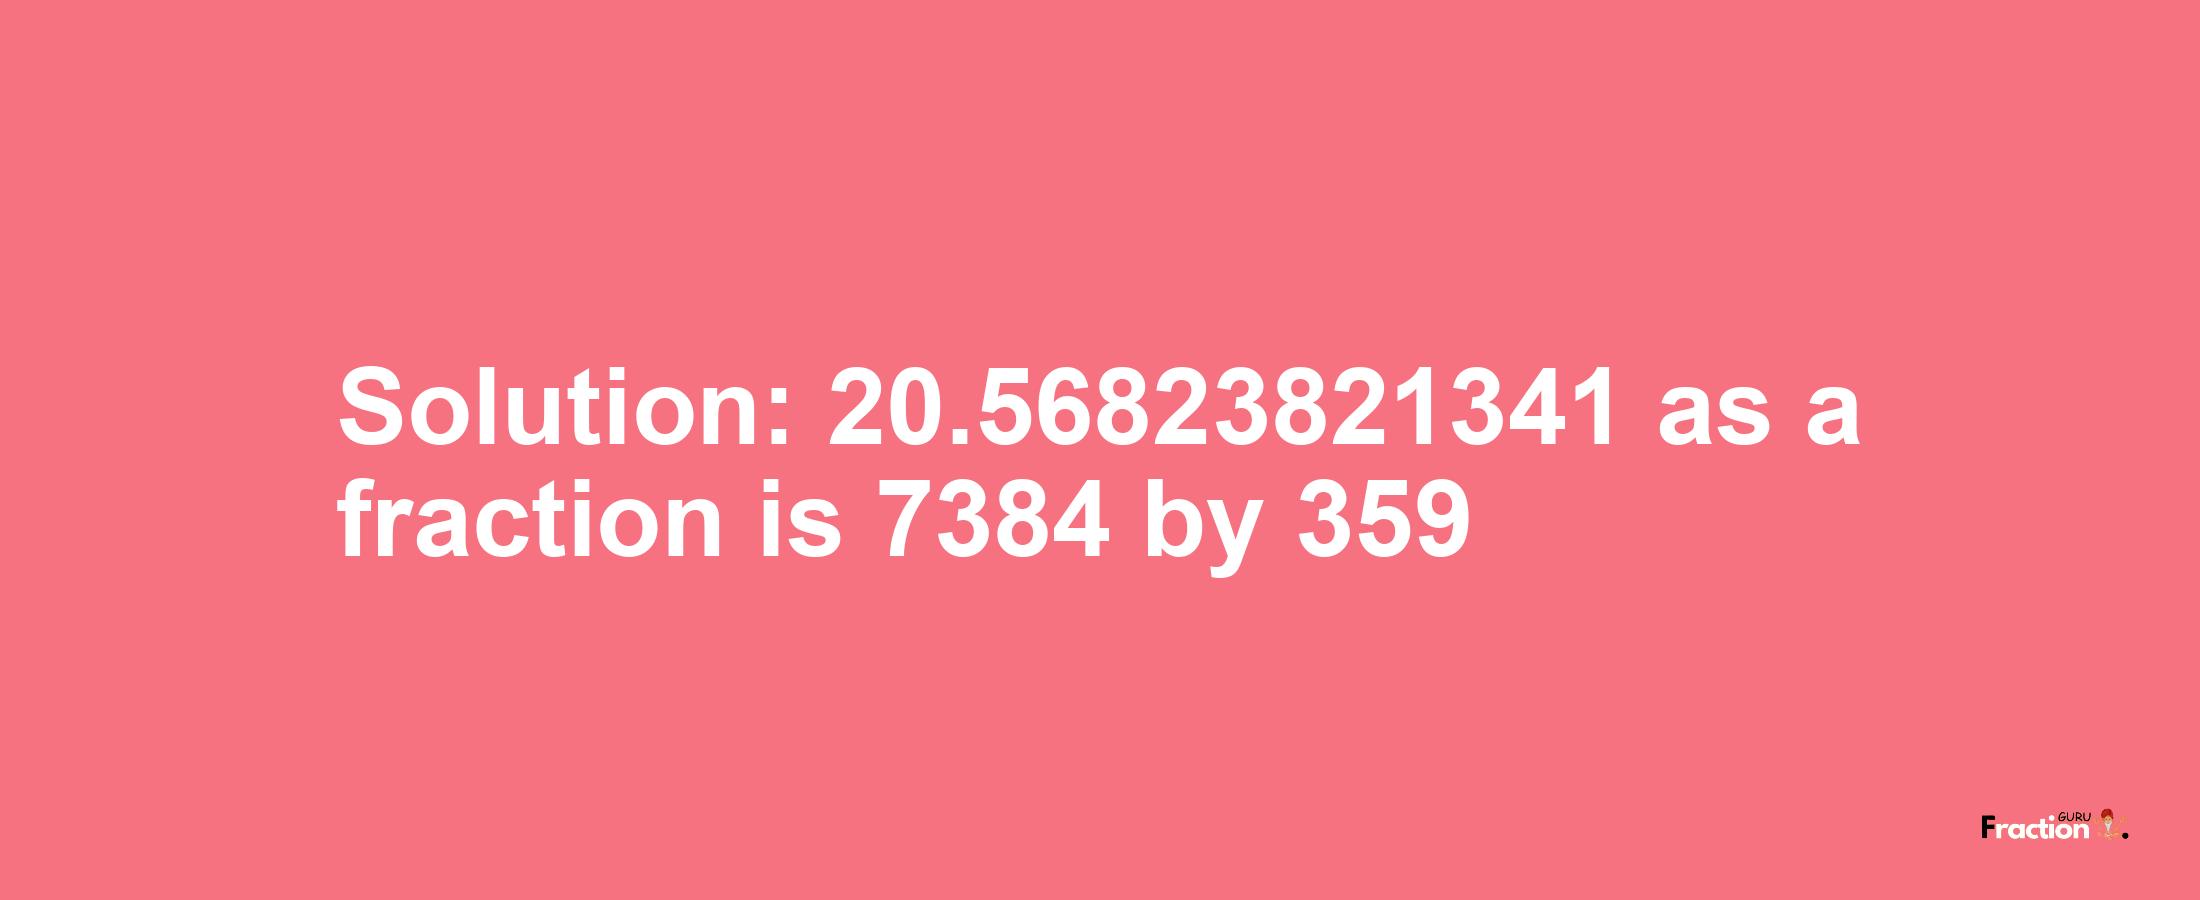 Solution:20.56823821341 as a fraction is 7384/359